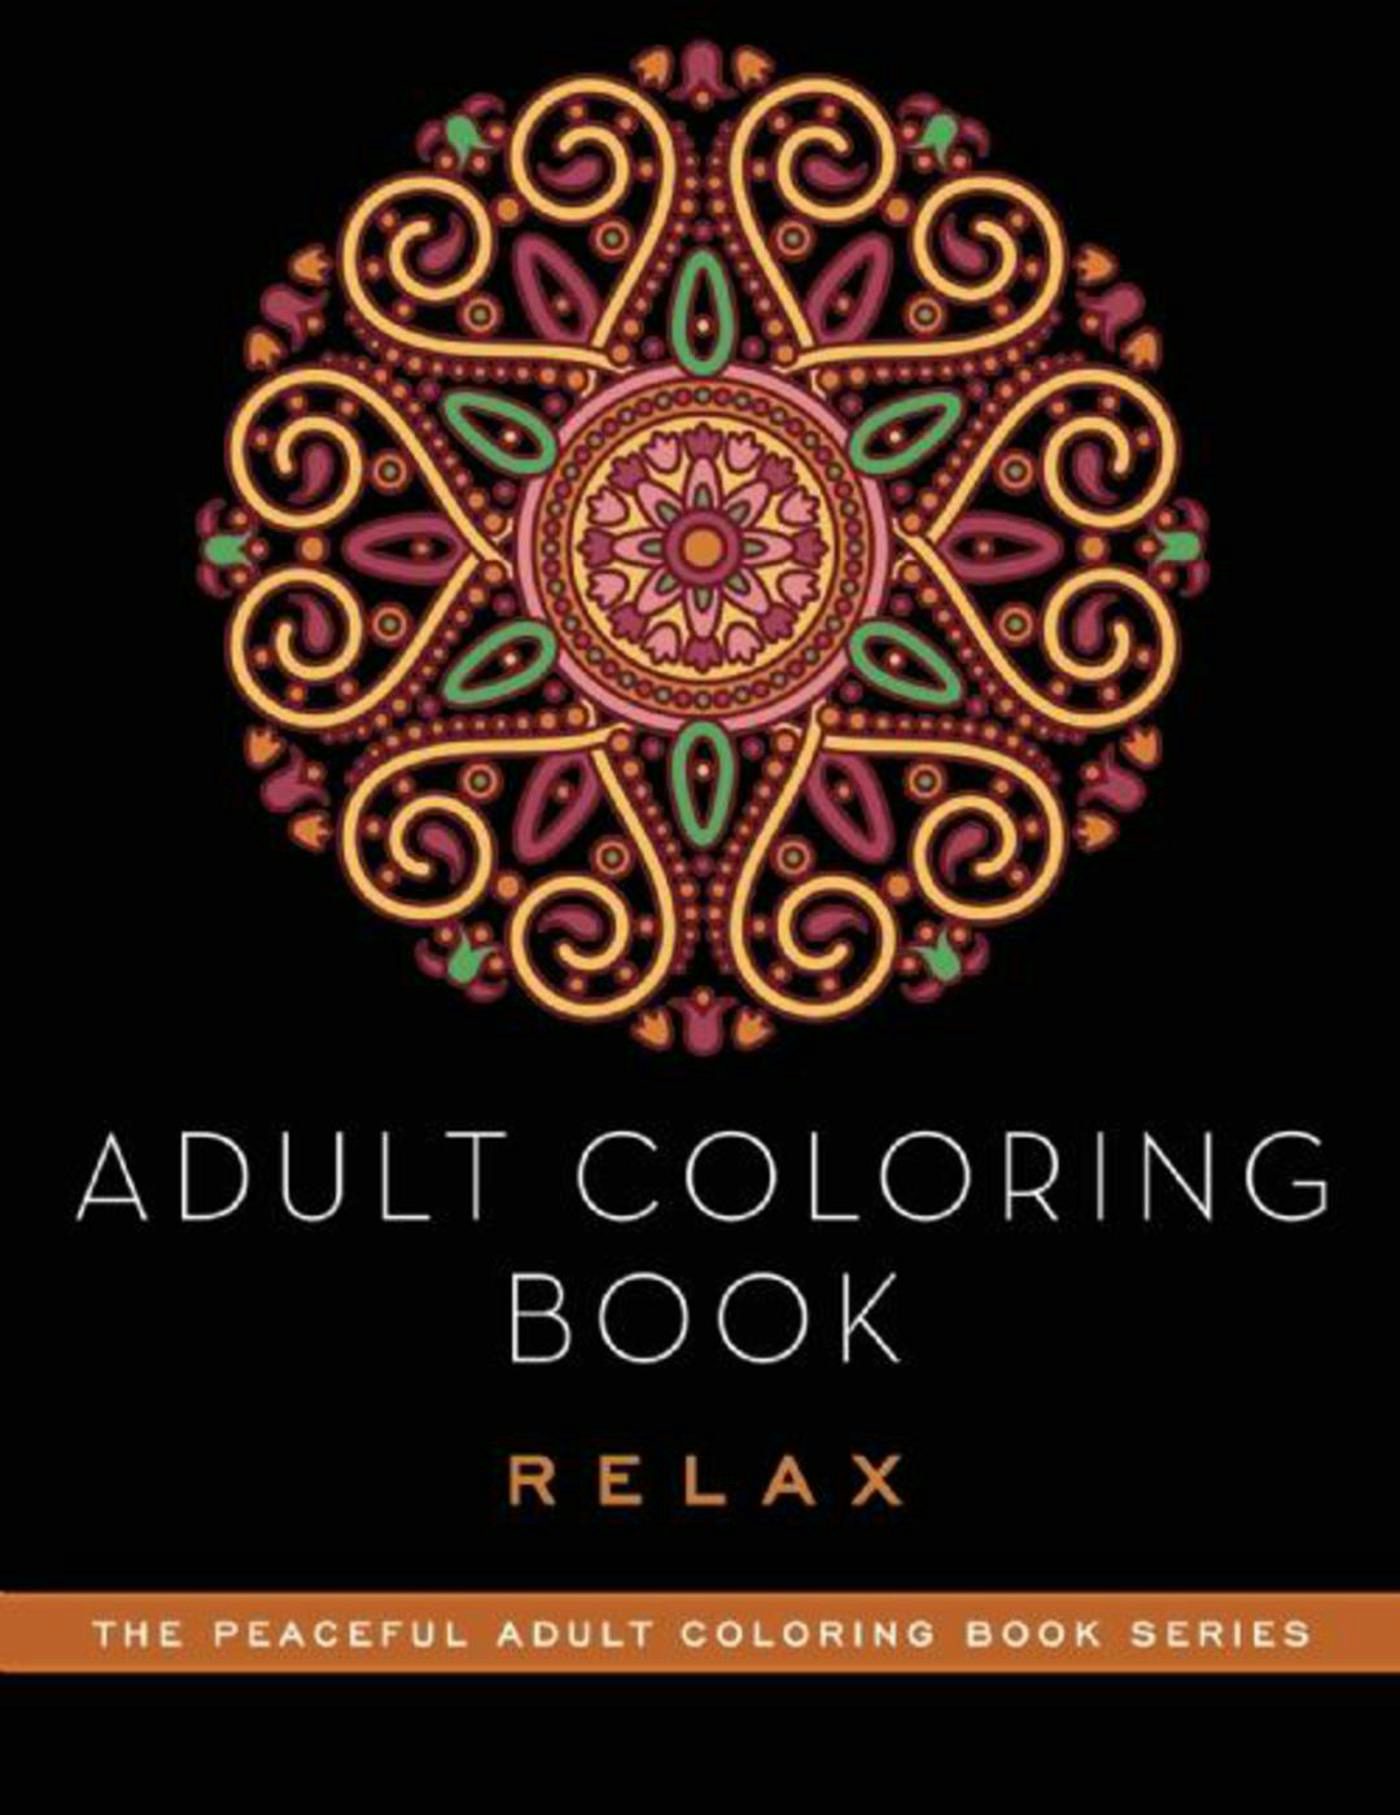 Adult Coloring Book: Relax